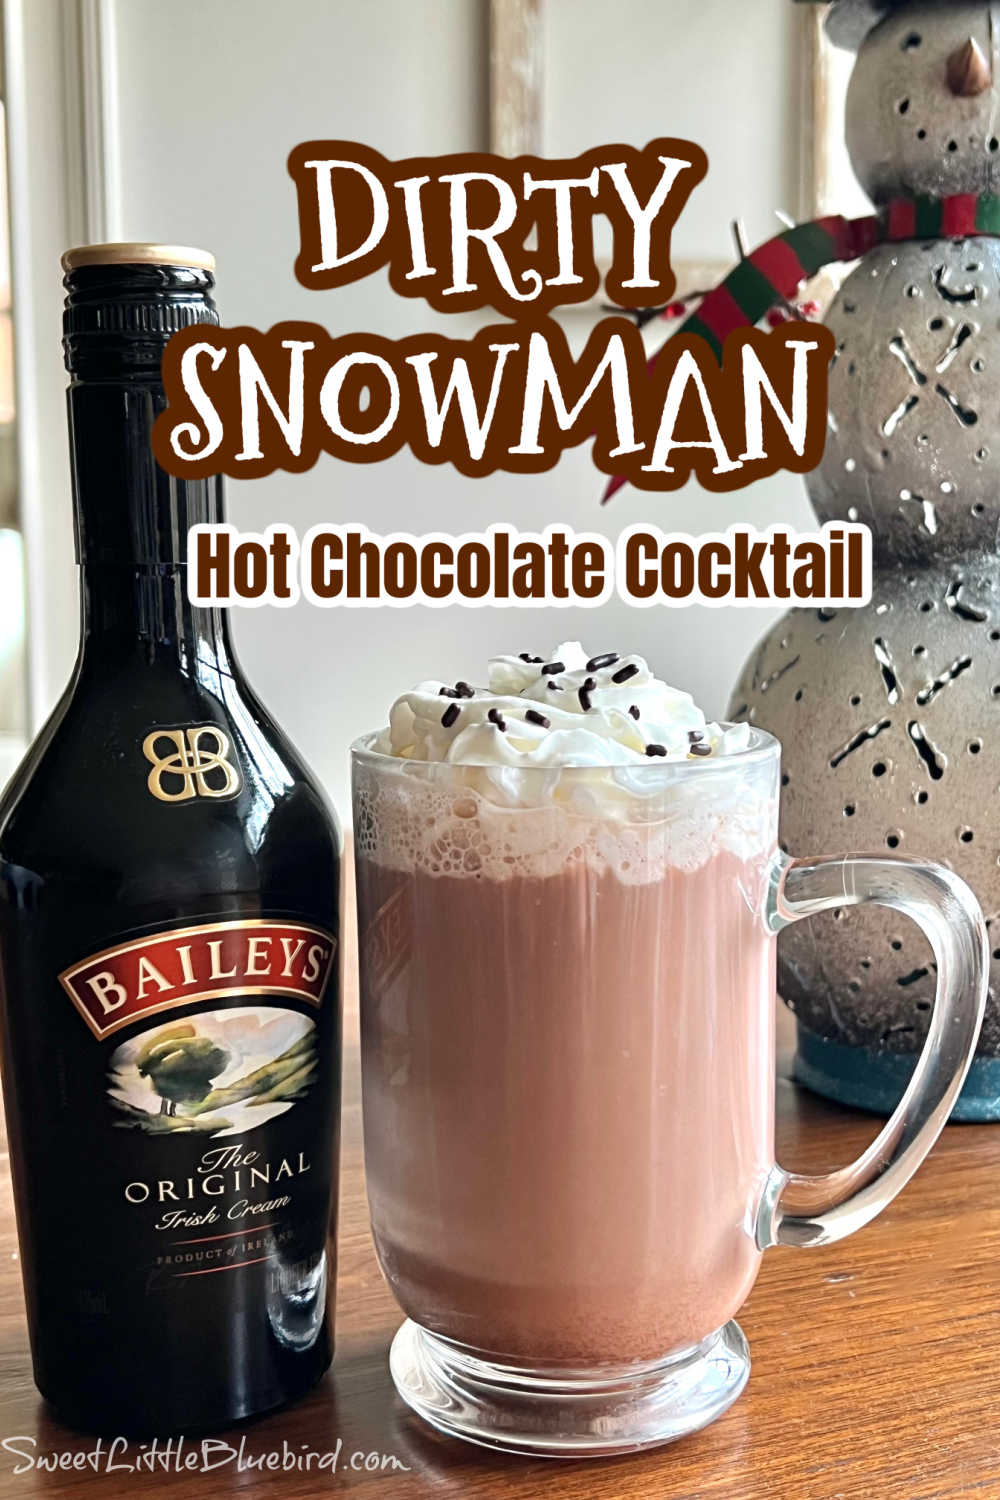 This photo shows a Dirty Snowman cocktail served in a clear mug glass, topped with whipped cream and chocolate sprinkles. Next to the mug is a bottle of Baileys Irish Crème.